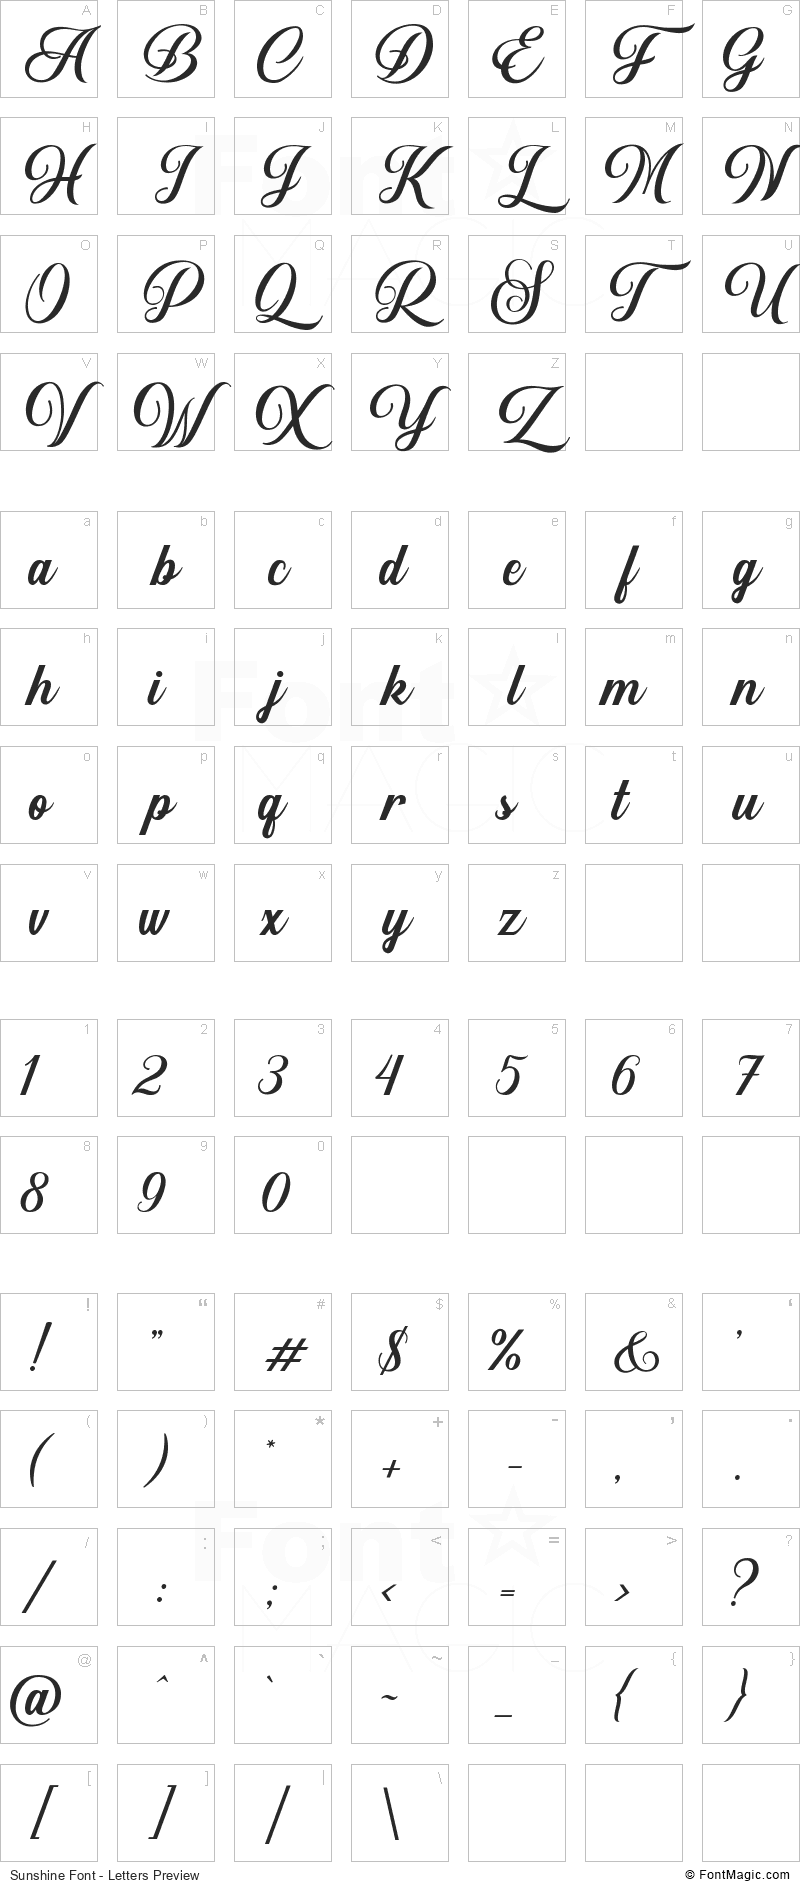 Sunshine Font - All Latters Preview Chart